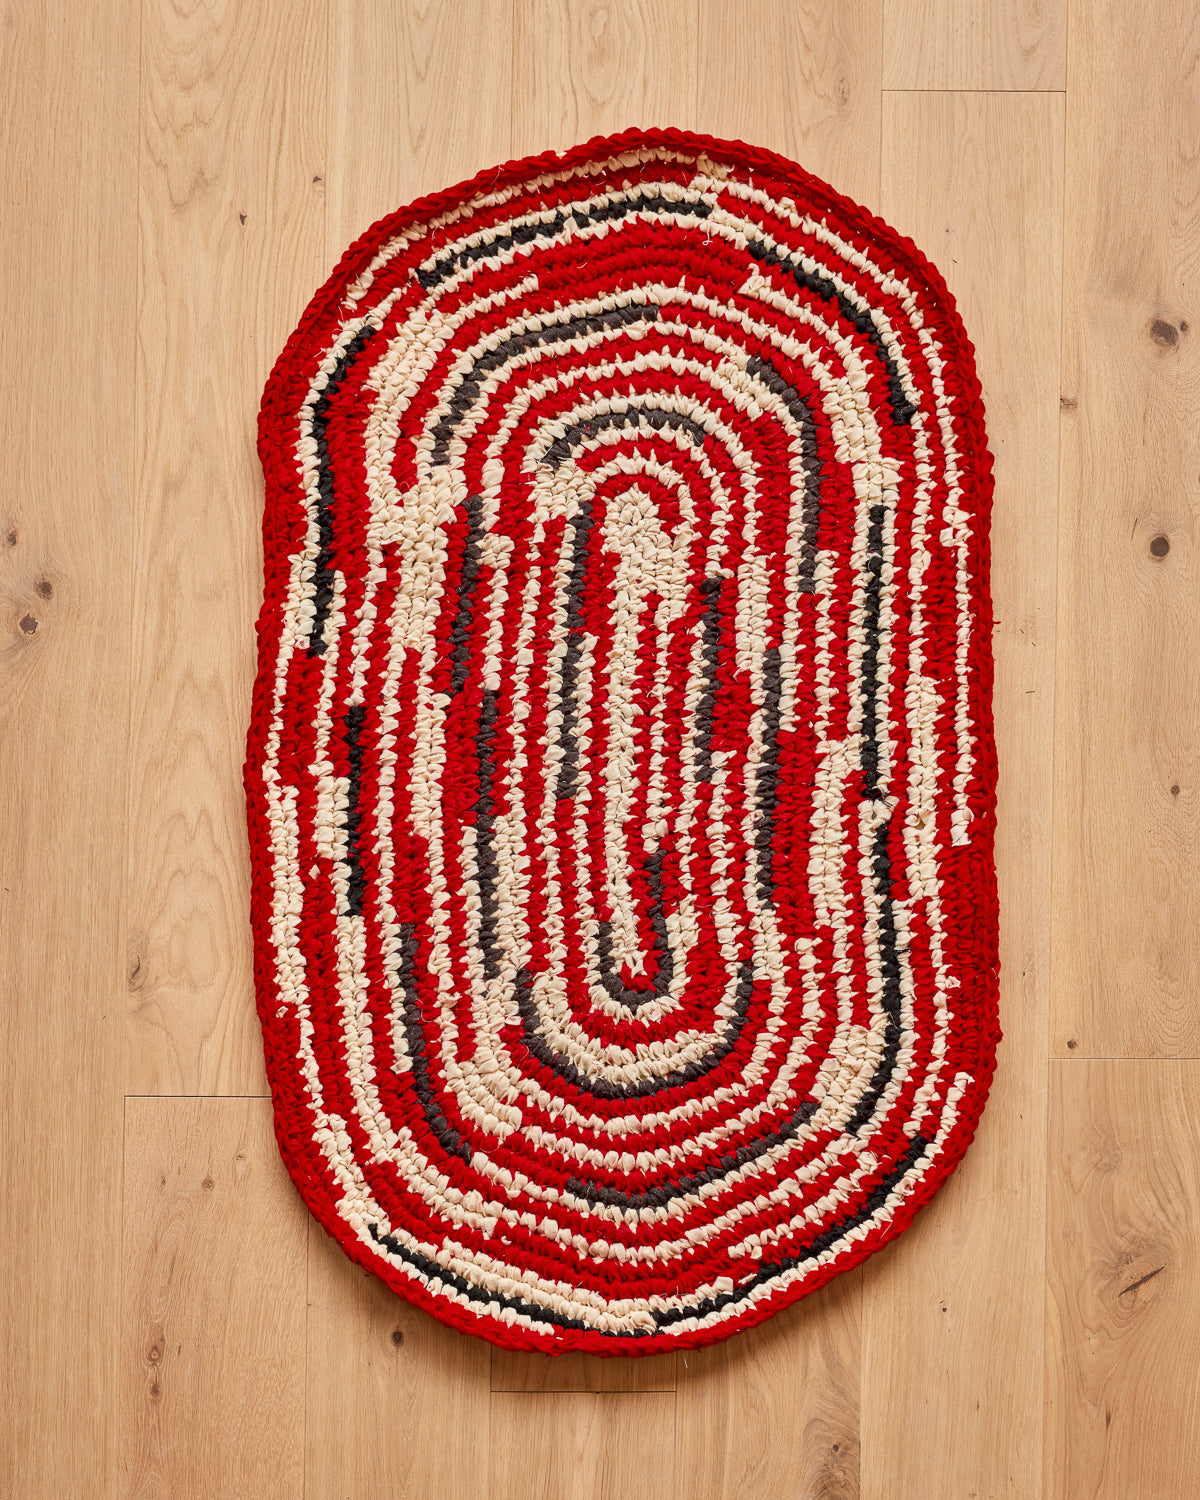 Olly's Oval Rug - Red, White and Black